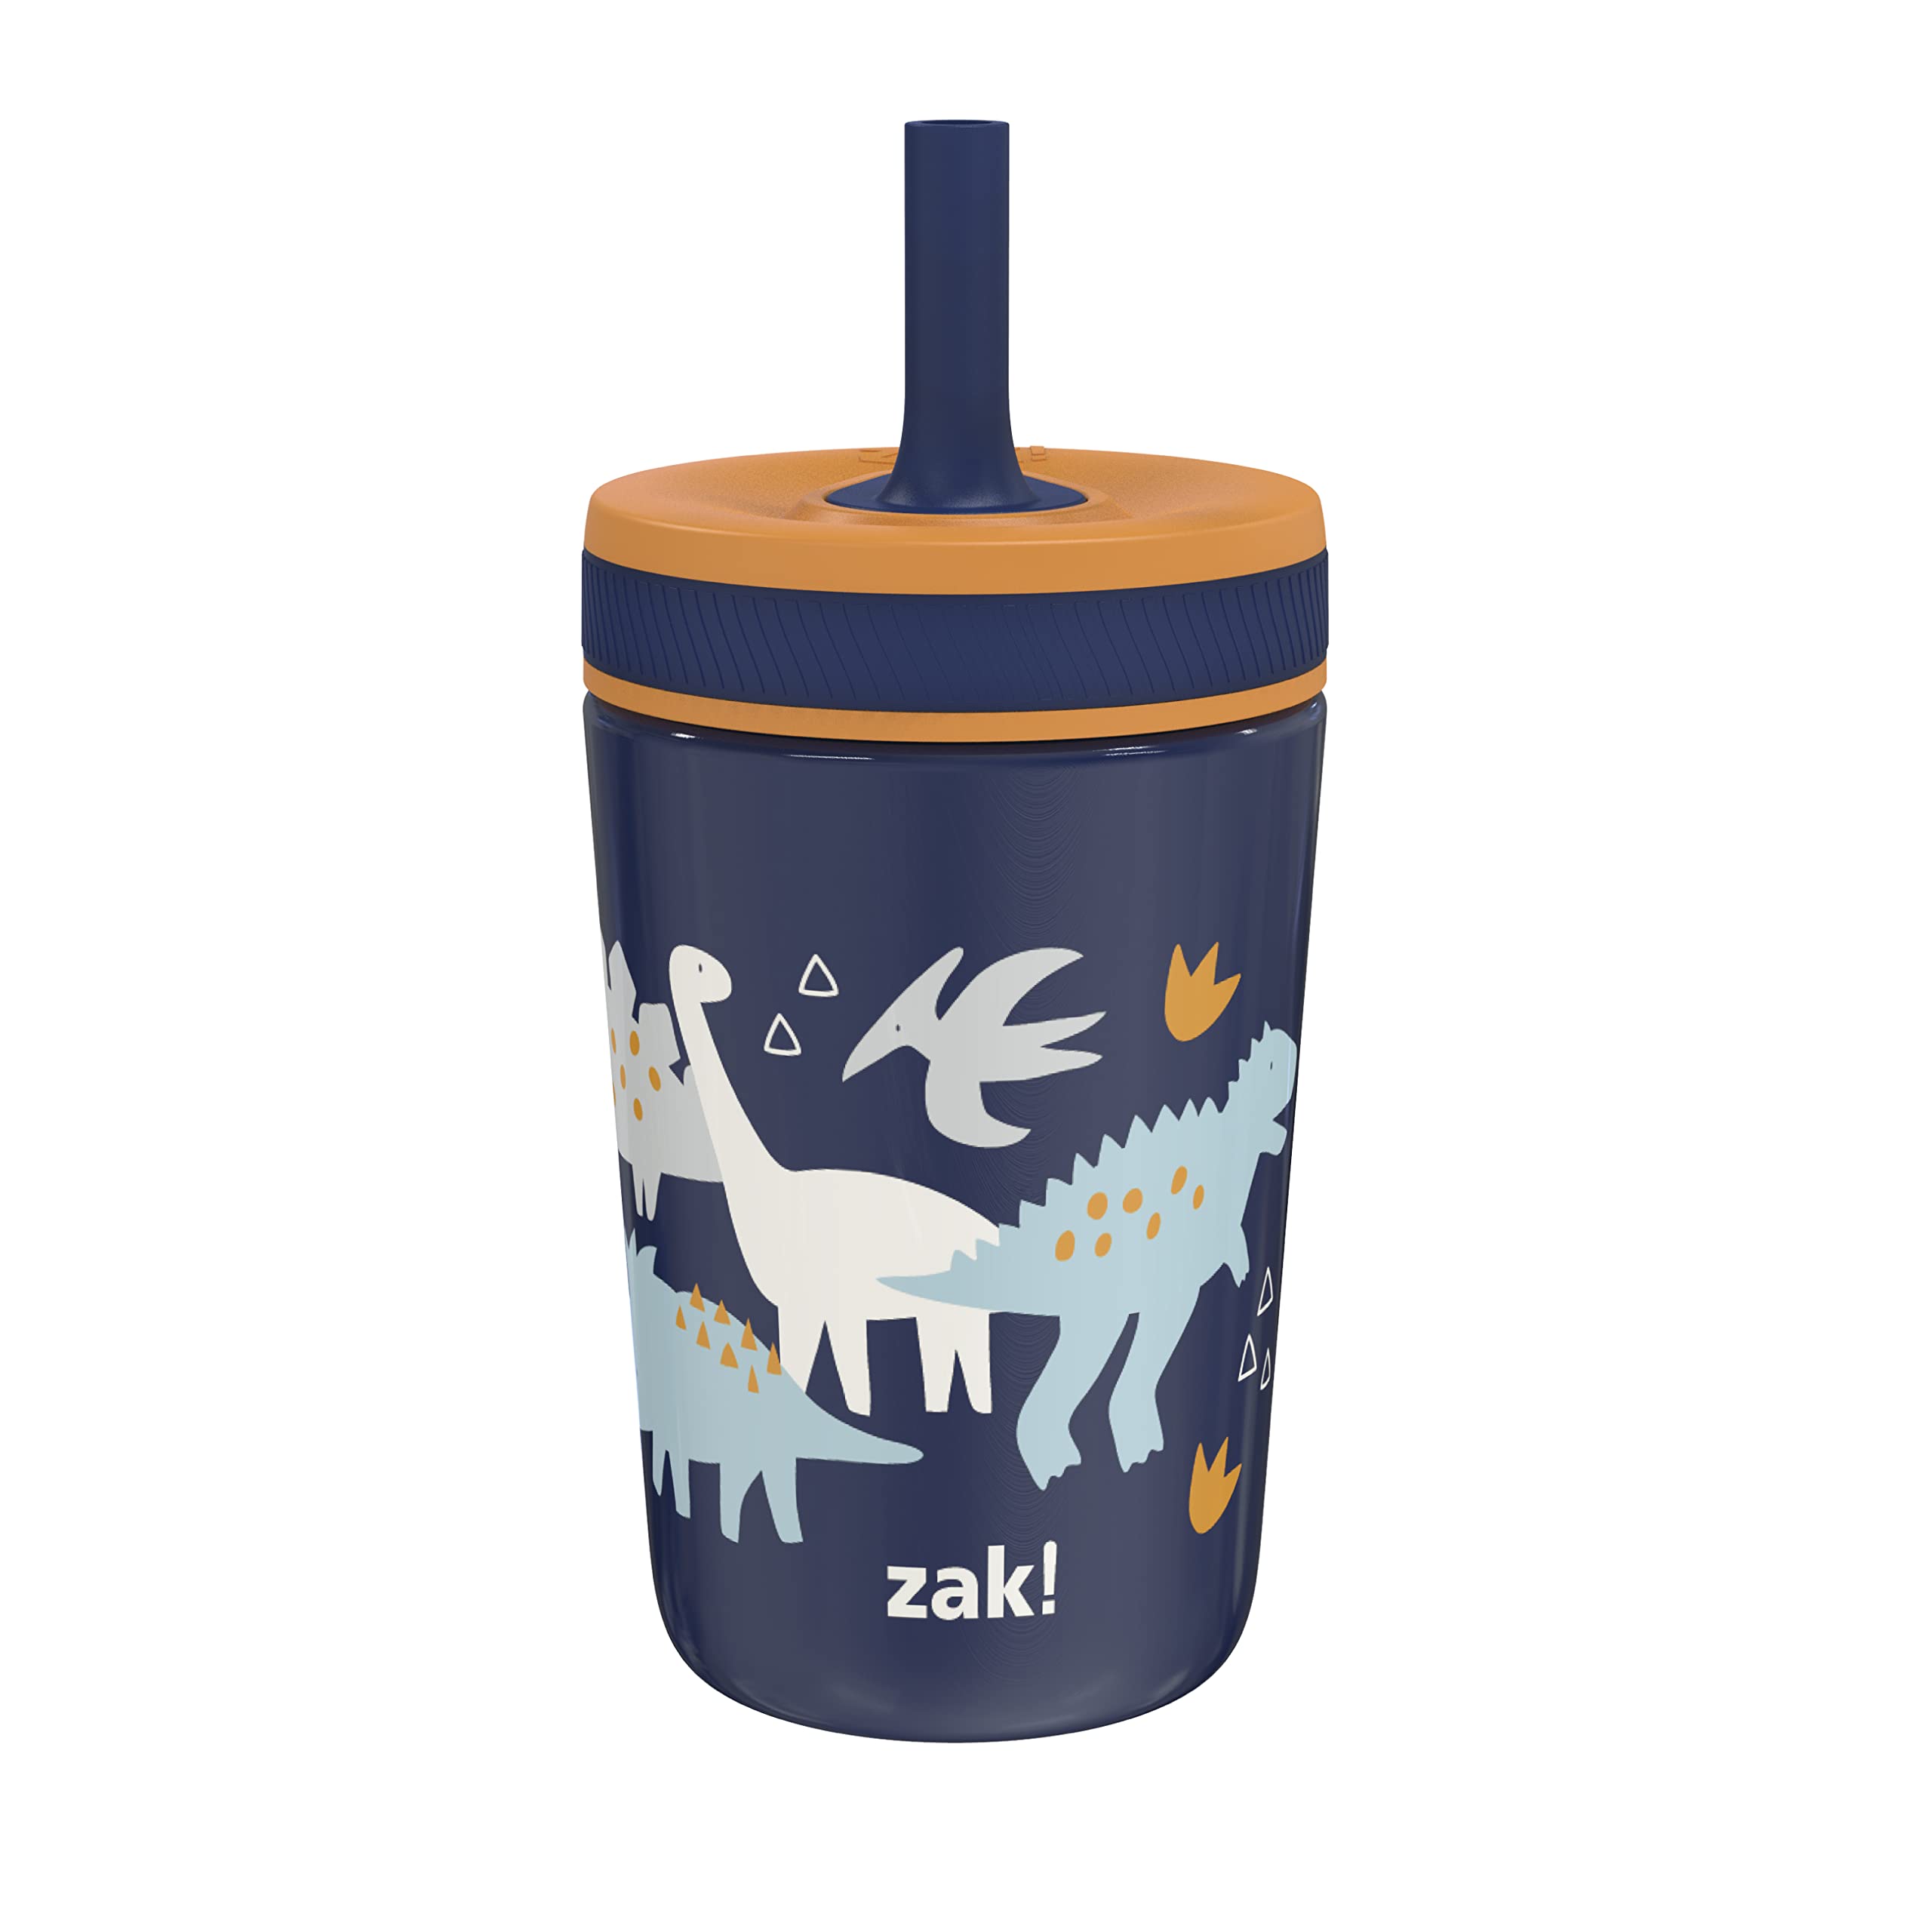 Zak Designs Kelso Toddler Cups For Travel or At Home, 12oz Vacuum Insulated Stainless Steel Sippy Cup With Leak-Proof Design is Perfect For Kids (Zaksaurus)